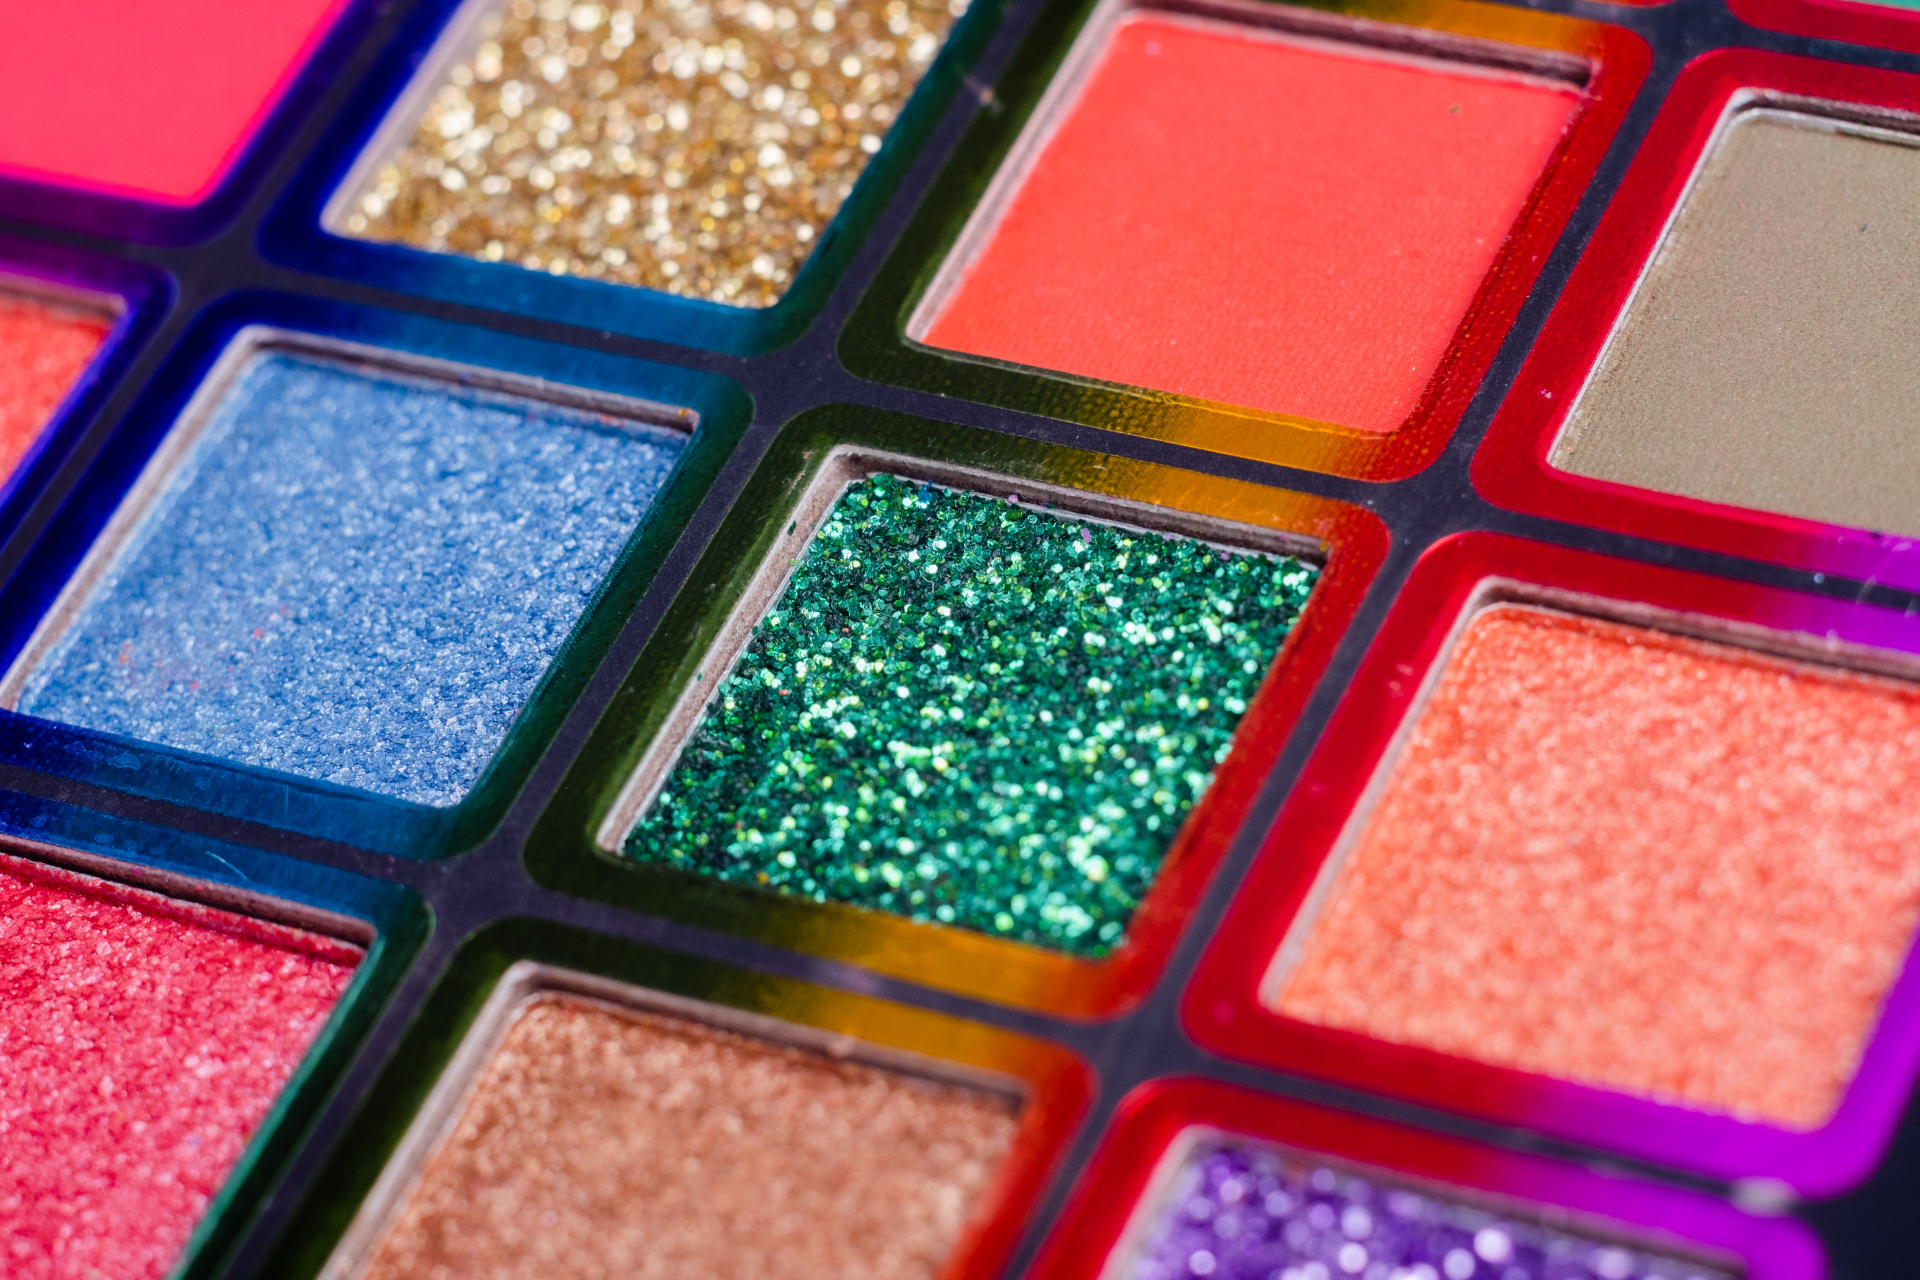 Fancy makeup palettes: Too pretty to use?!